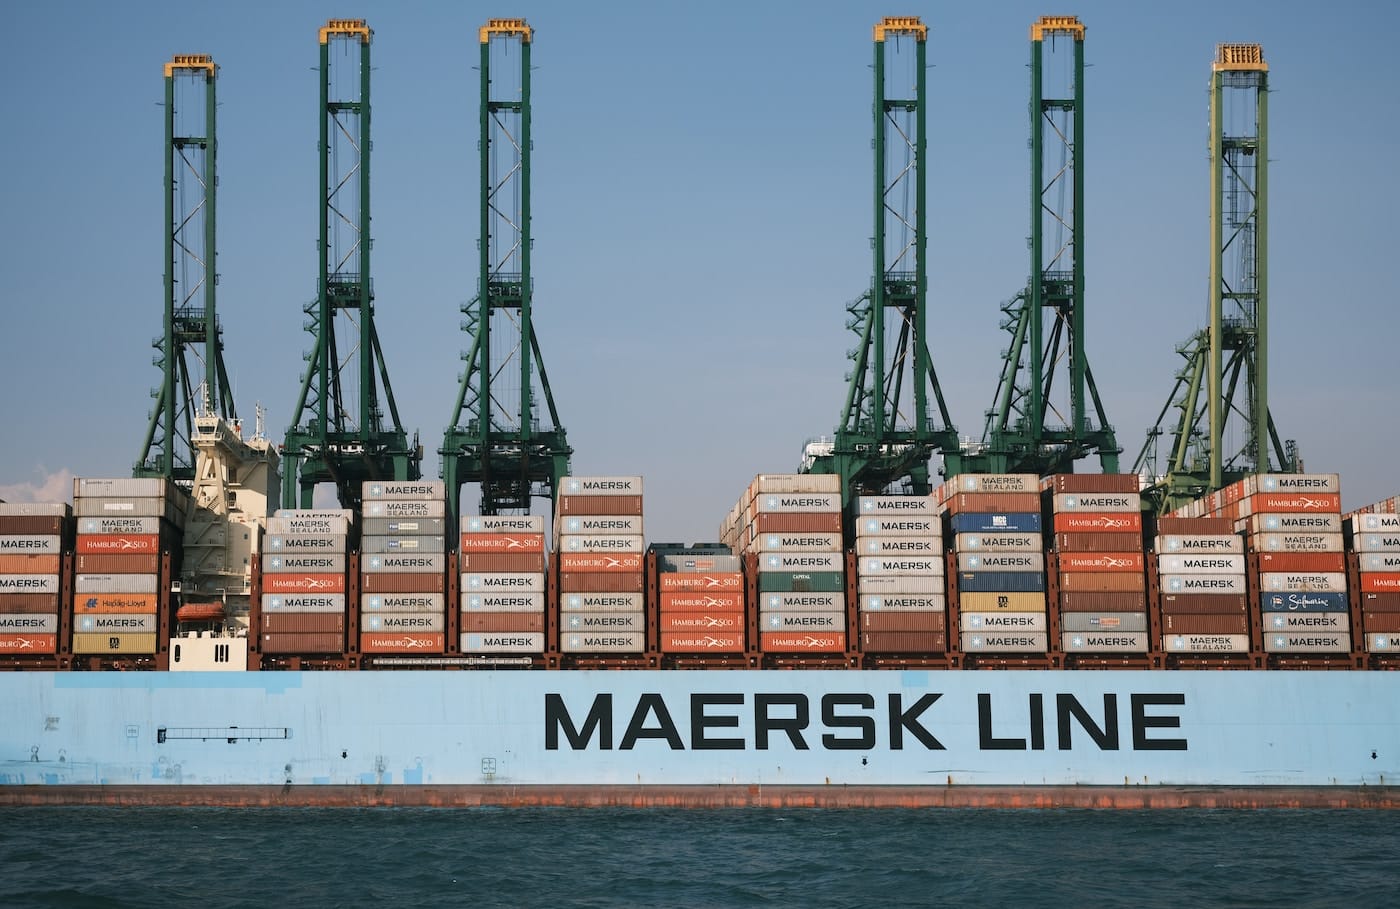 5 Best Container Shipping Stocks With Dividends